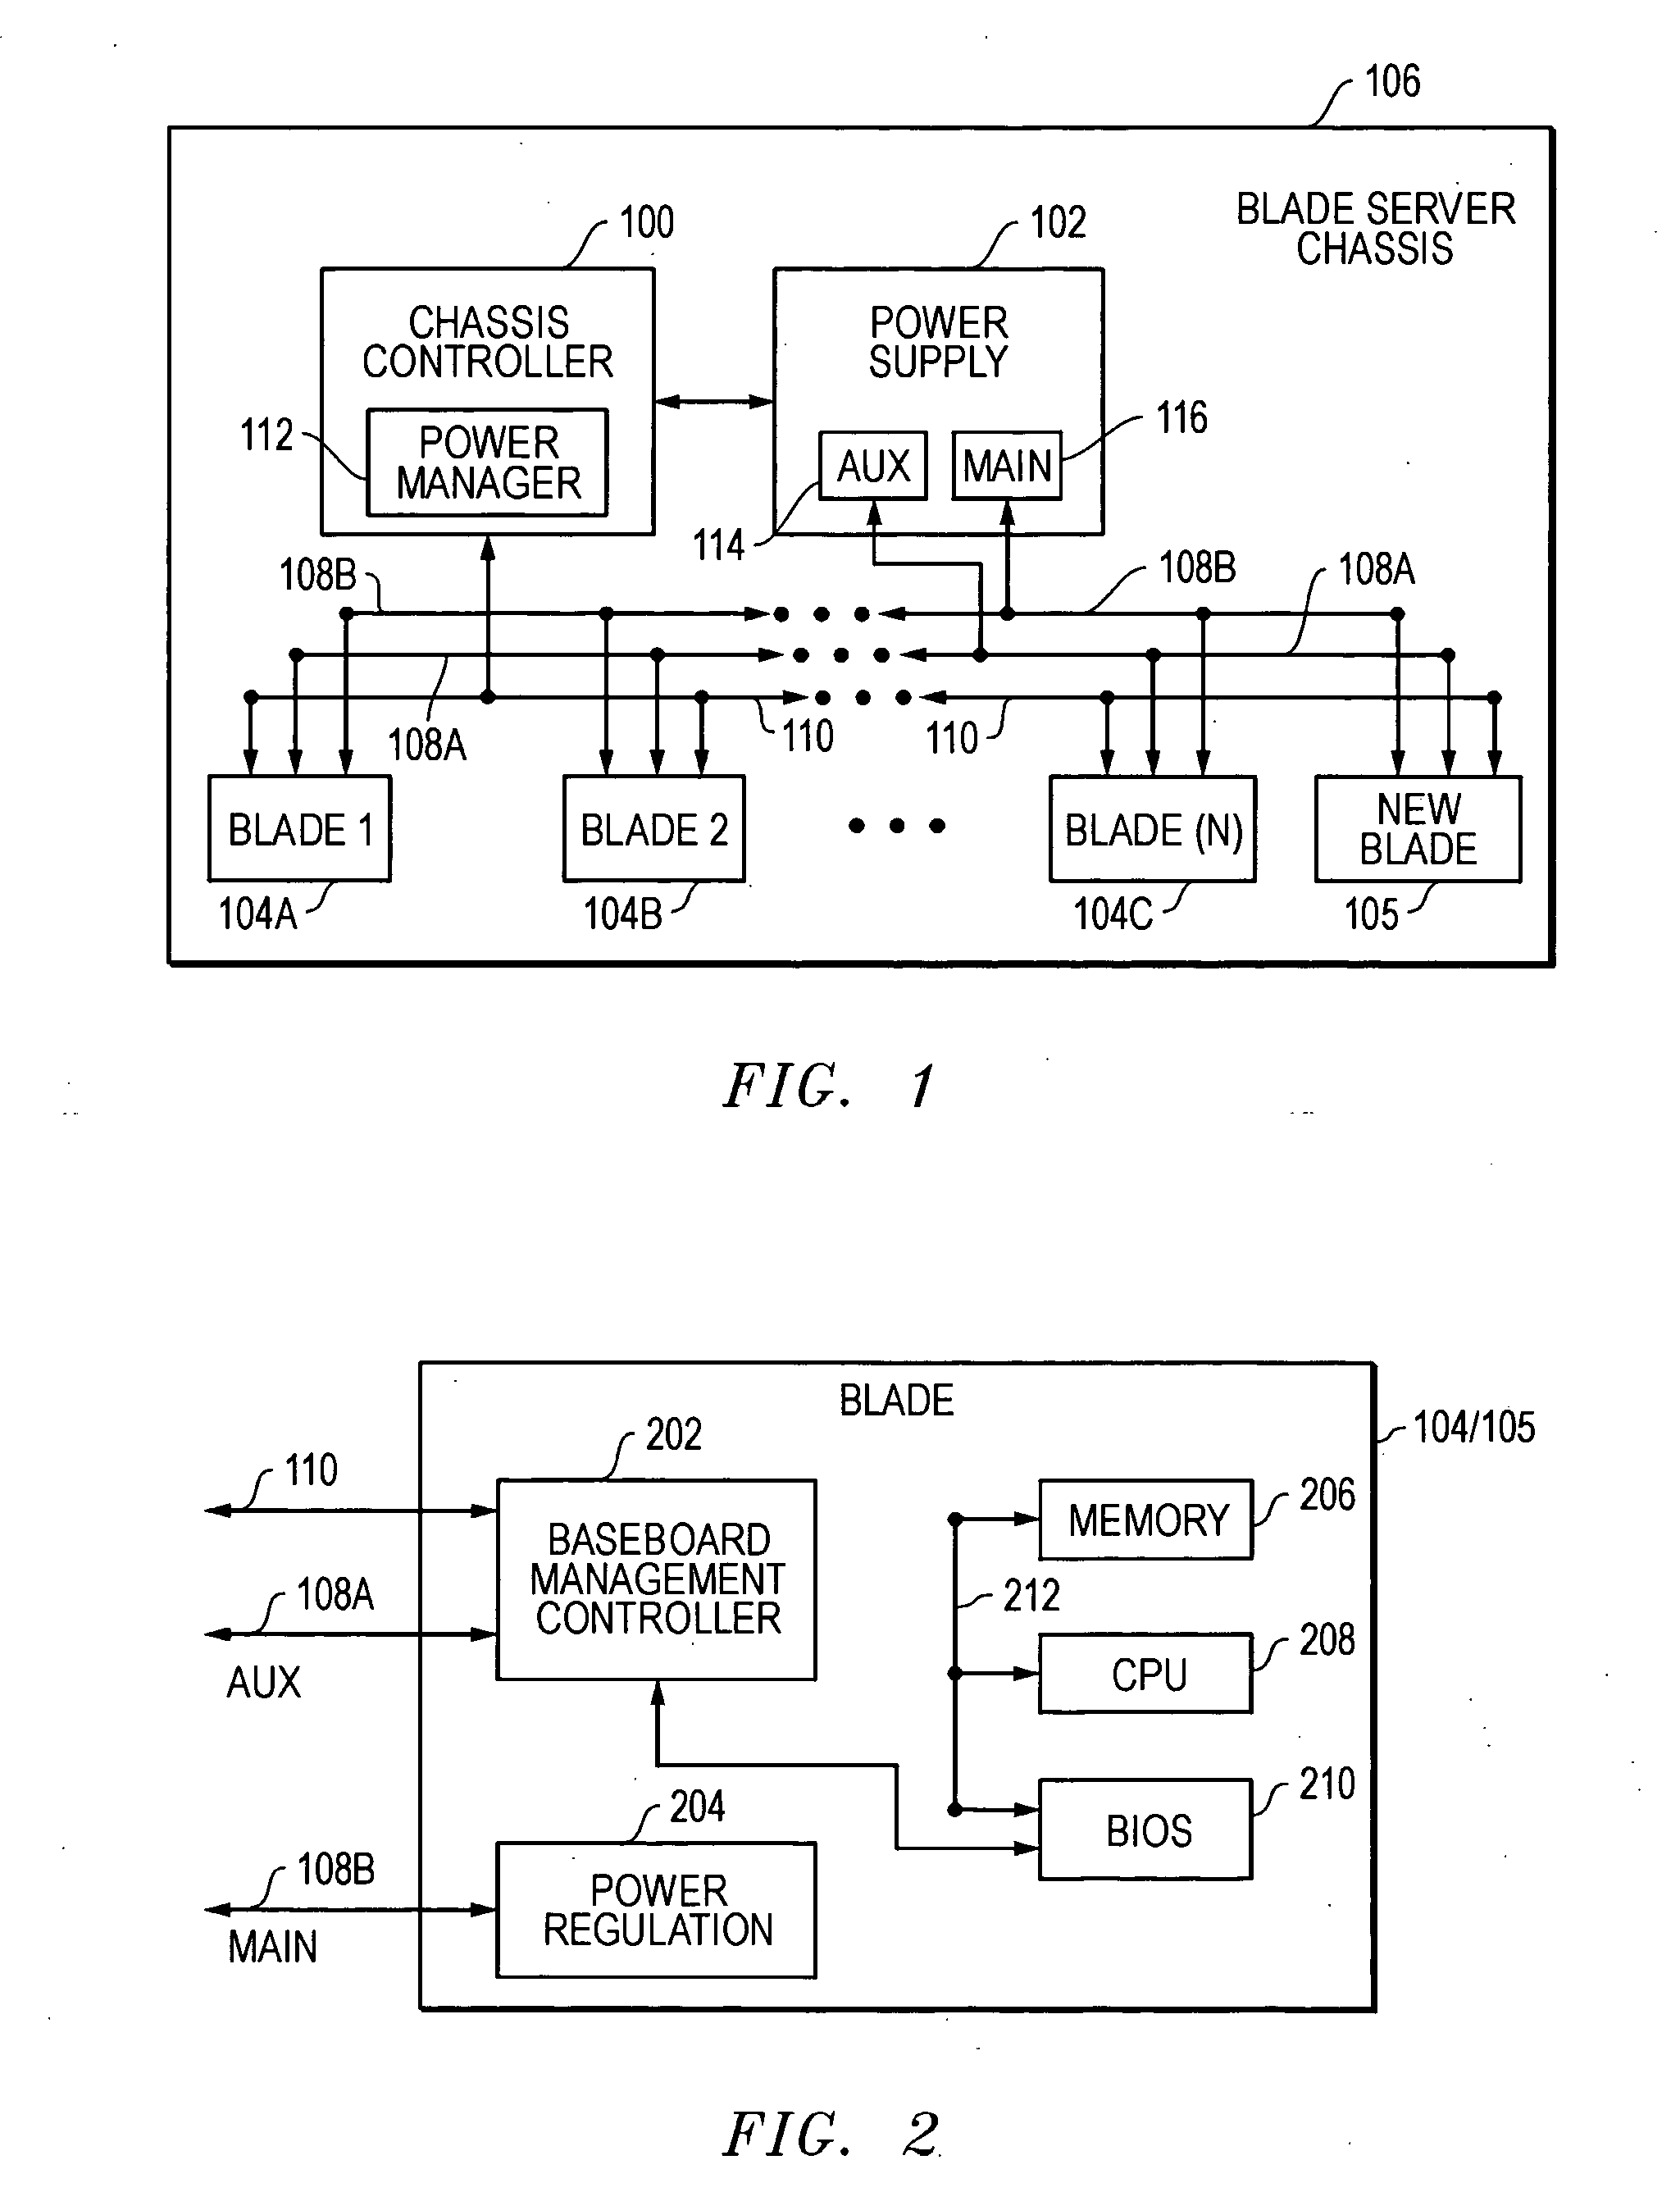 System and method for power usage level management of blades installed within blade servers